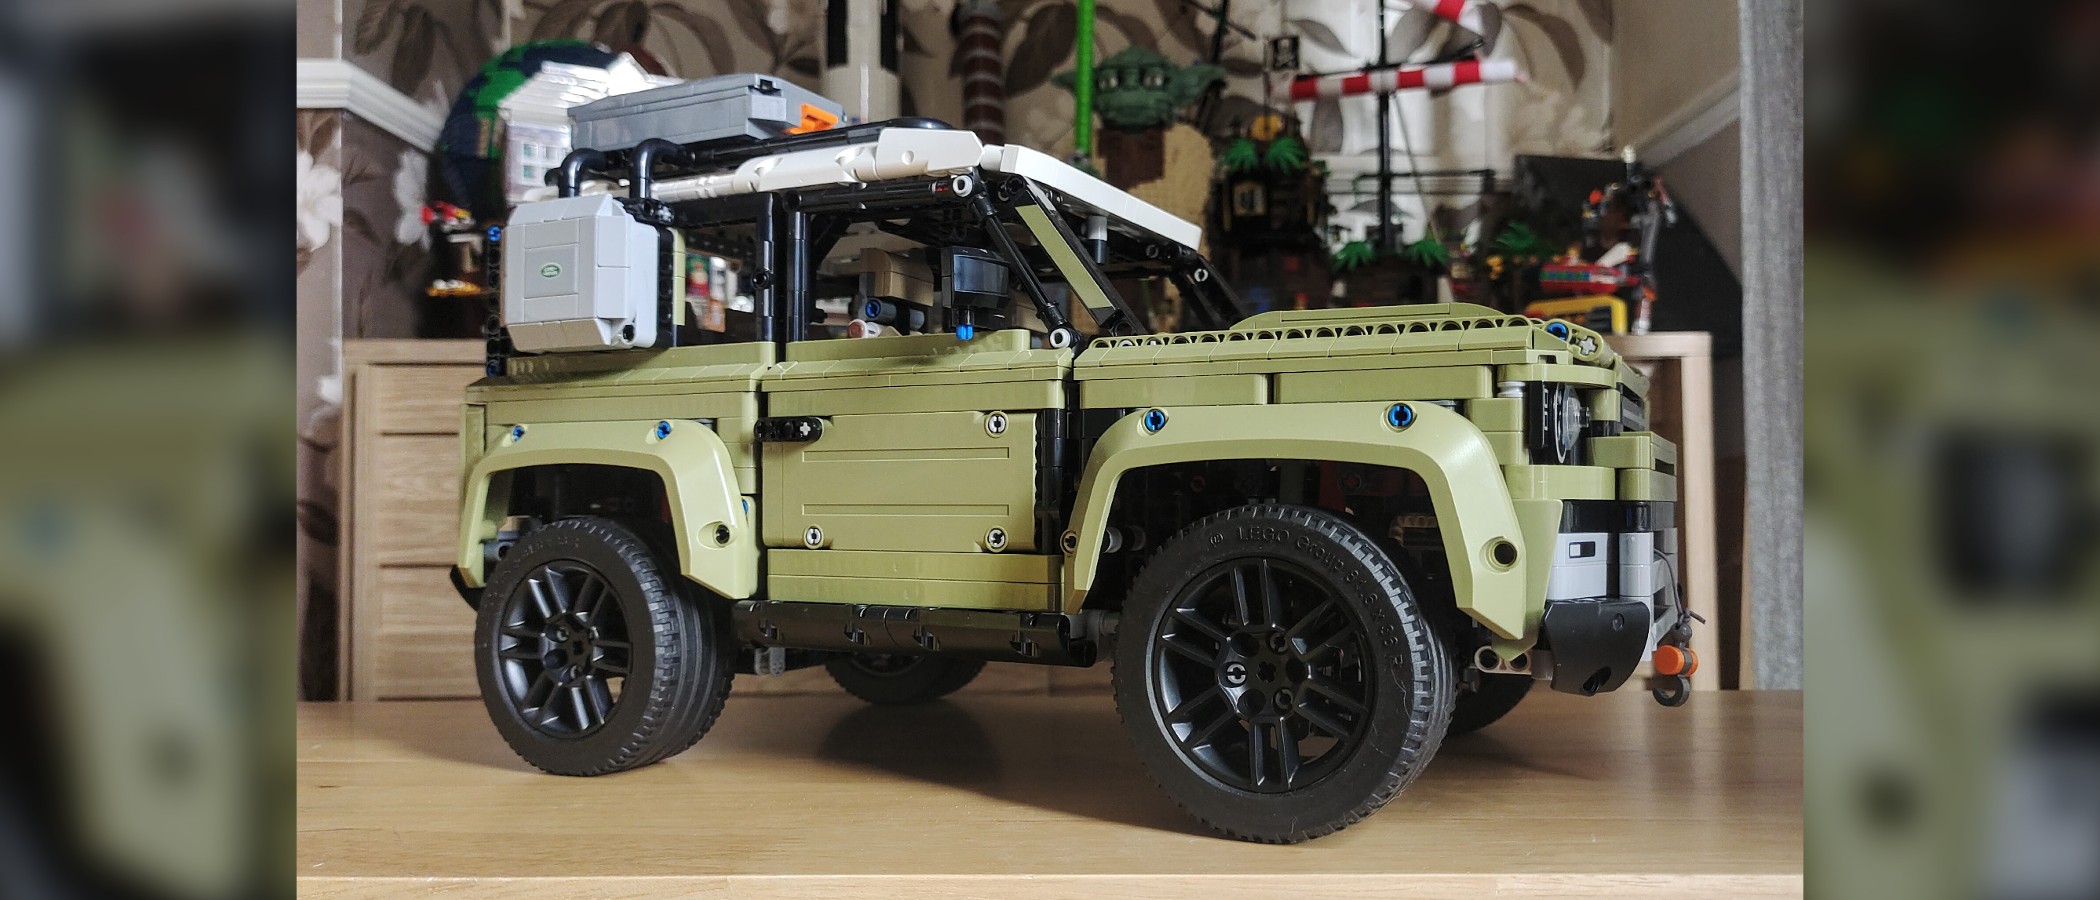 Lego Land Rover Defender review | Live Science